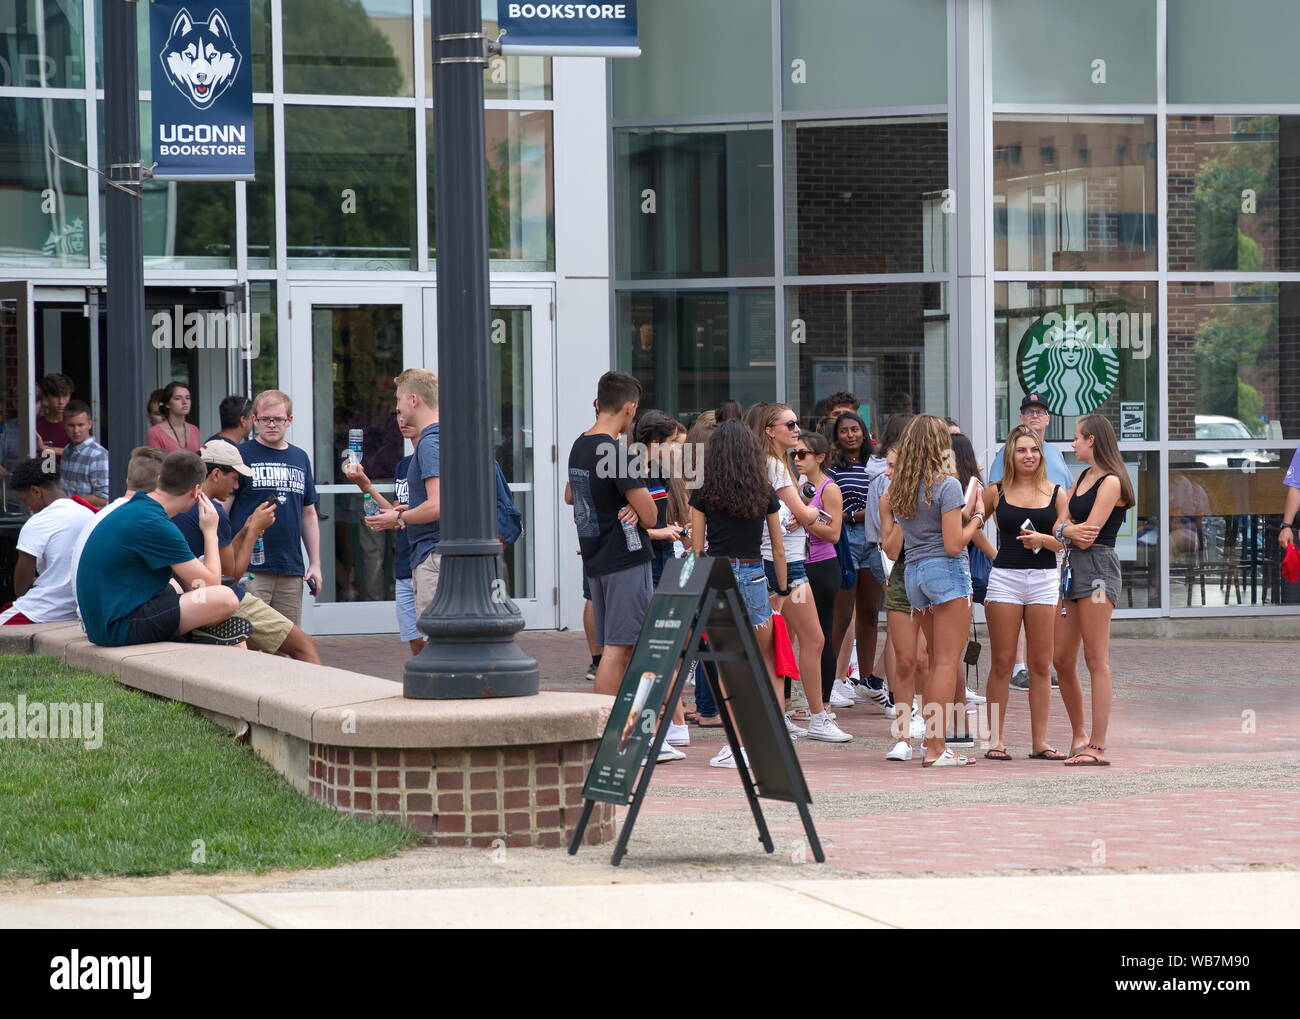 Storrs, CT USA. Aug 2019. College coeds relaxing and socializing at the campus bookstore before the start of a new school year. Stock Photo